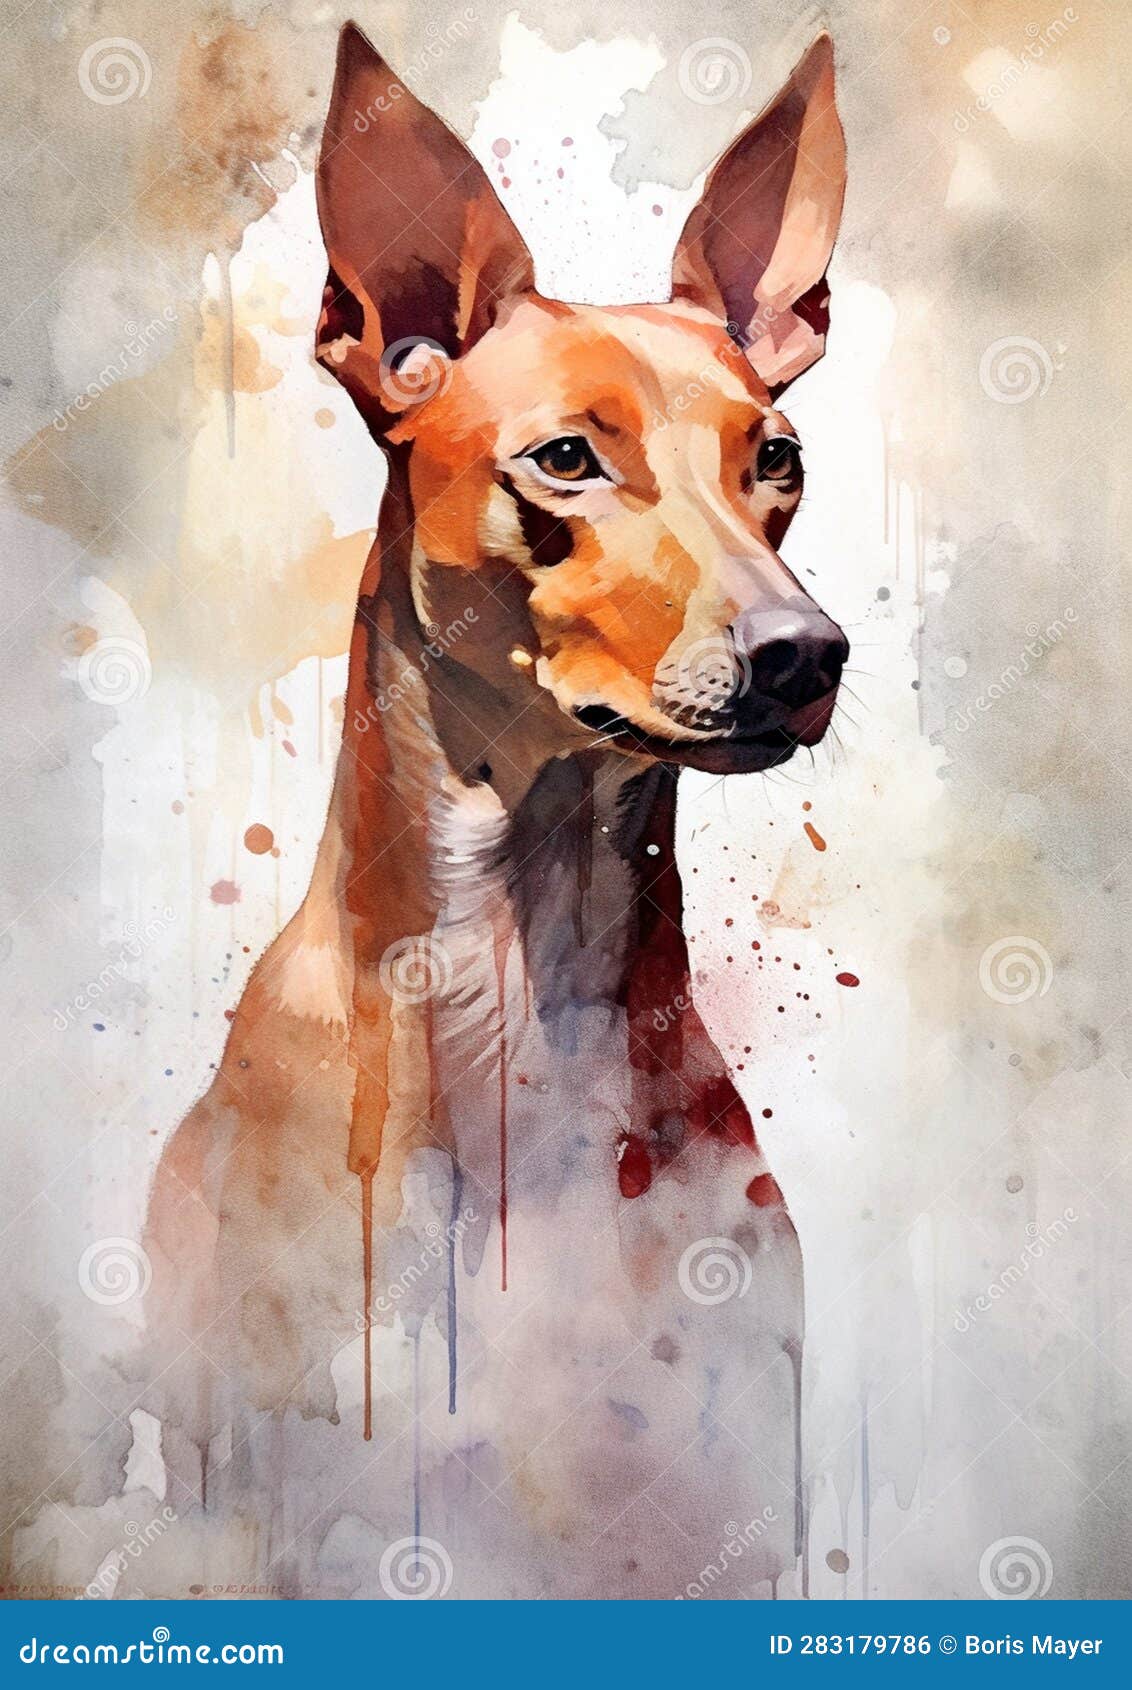 a colorful, digital watercolour painting, showing the portrait of a cirneco dell etna dog.